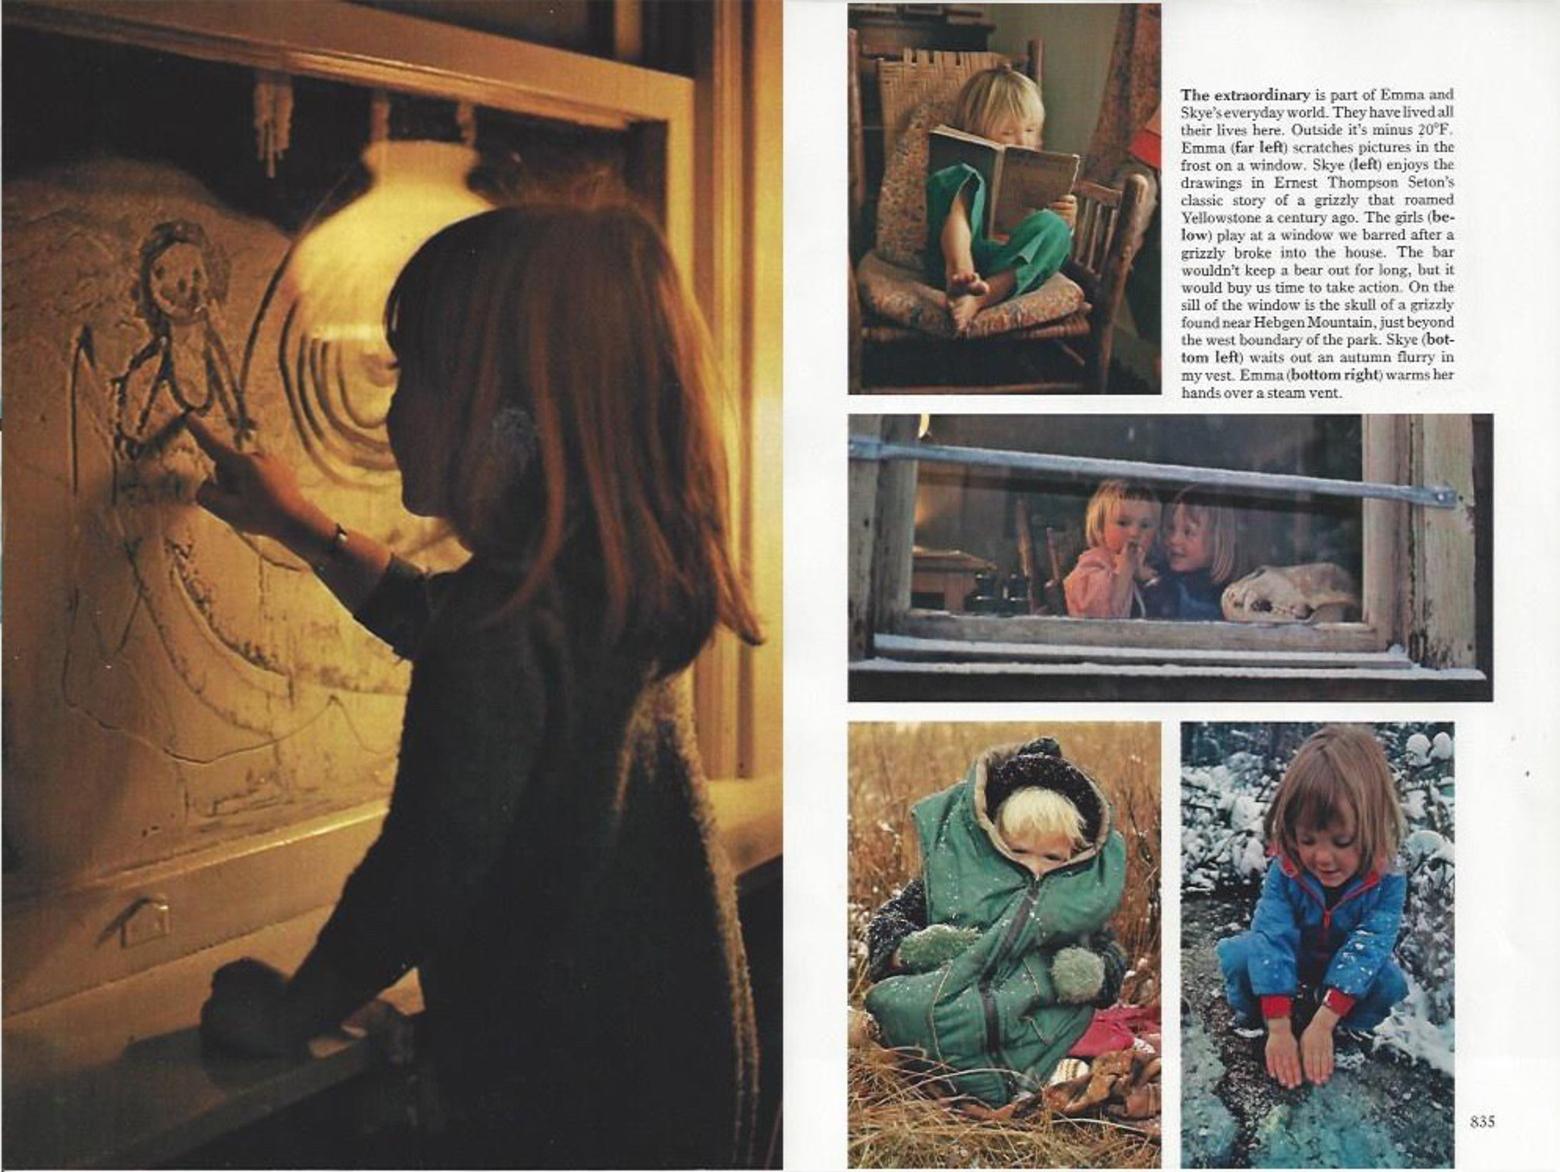 Steve and Angela Fuller raised and homeschooled their daughters, Emma and Skye, at Canyon. It was a matchless education and a life that will forever be imprinted upon their identity. Here, at left, Emma uses a frost-covered window as a drawing board and, at right, reminders of their growing years. This spread appeared in National Geographic. All photos by Steven Fuller